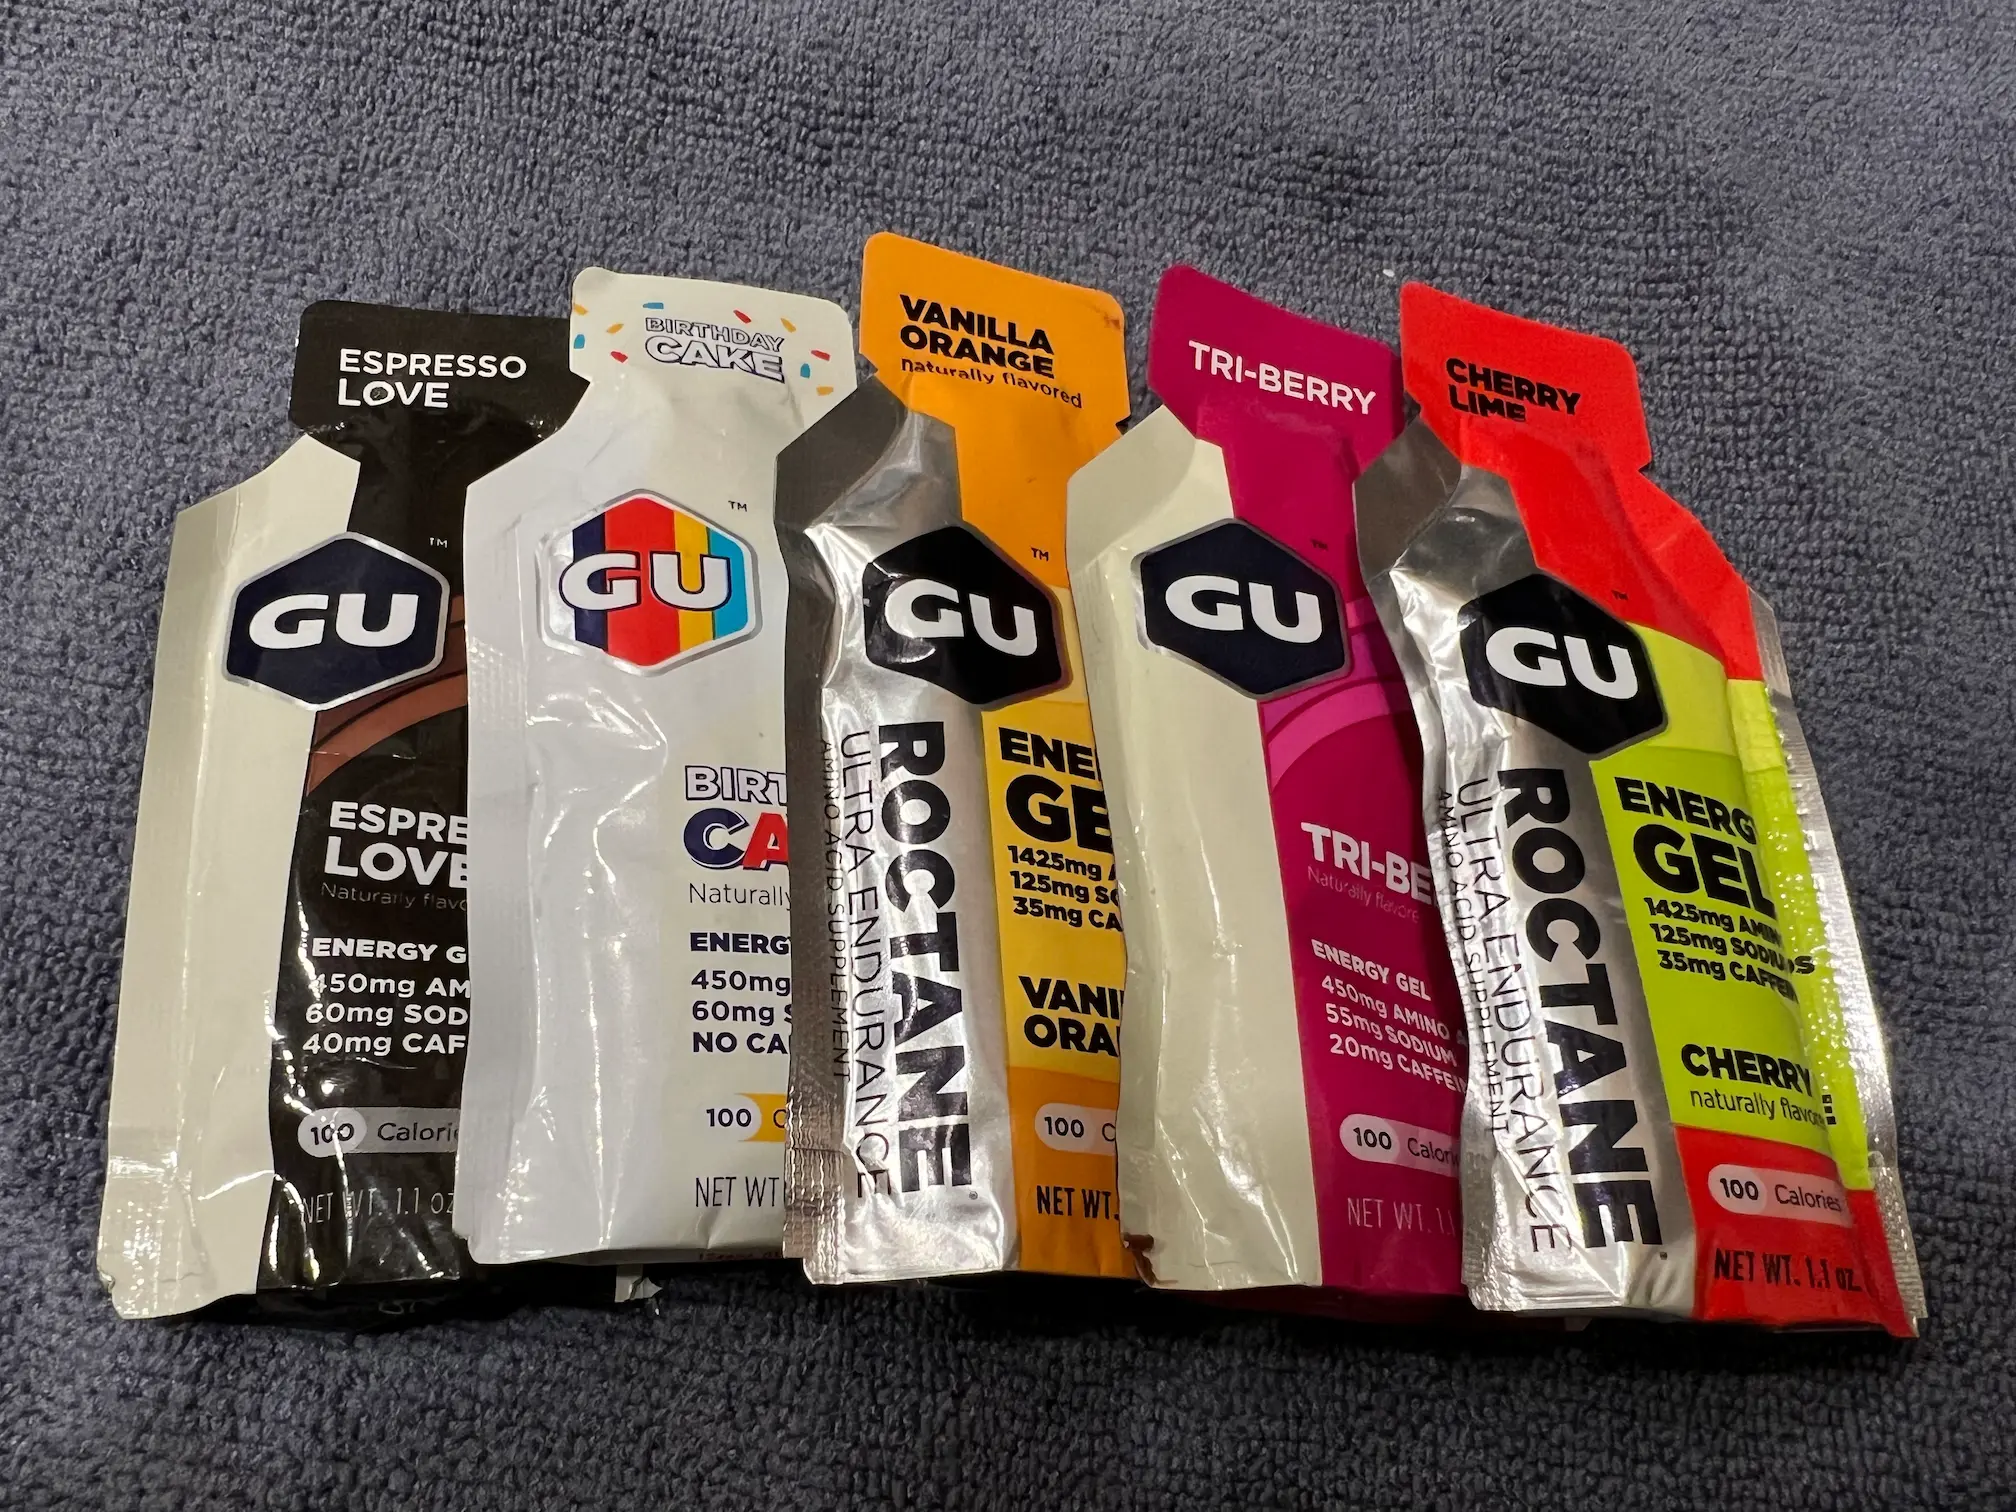 I carried these five packs of Gu Energy Gels during the gravel race.